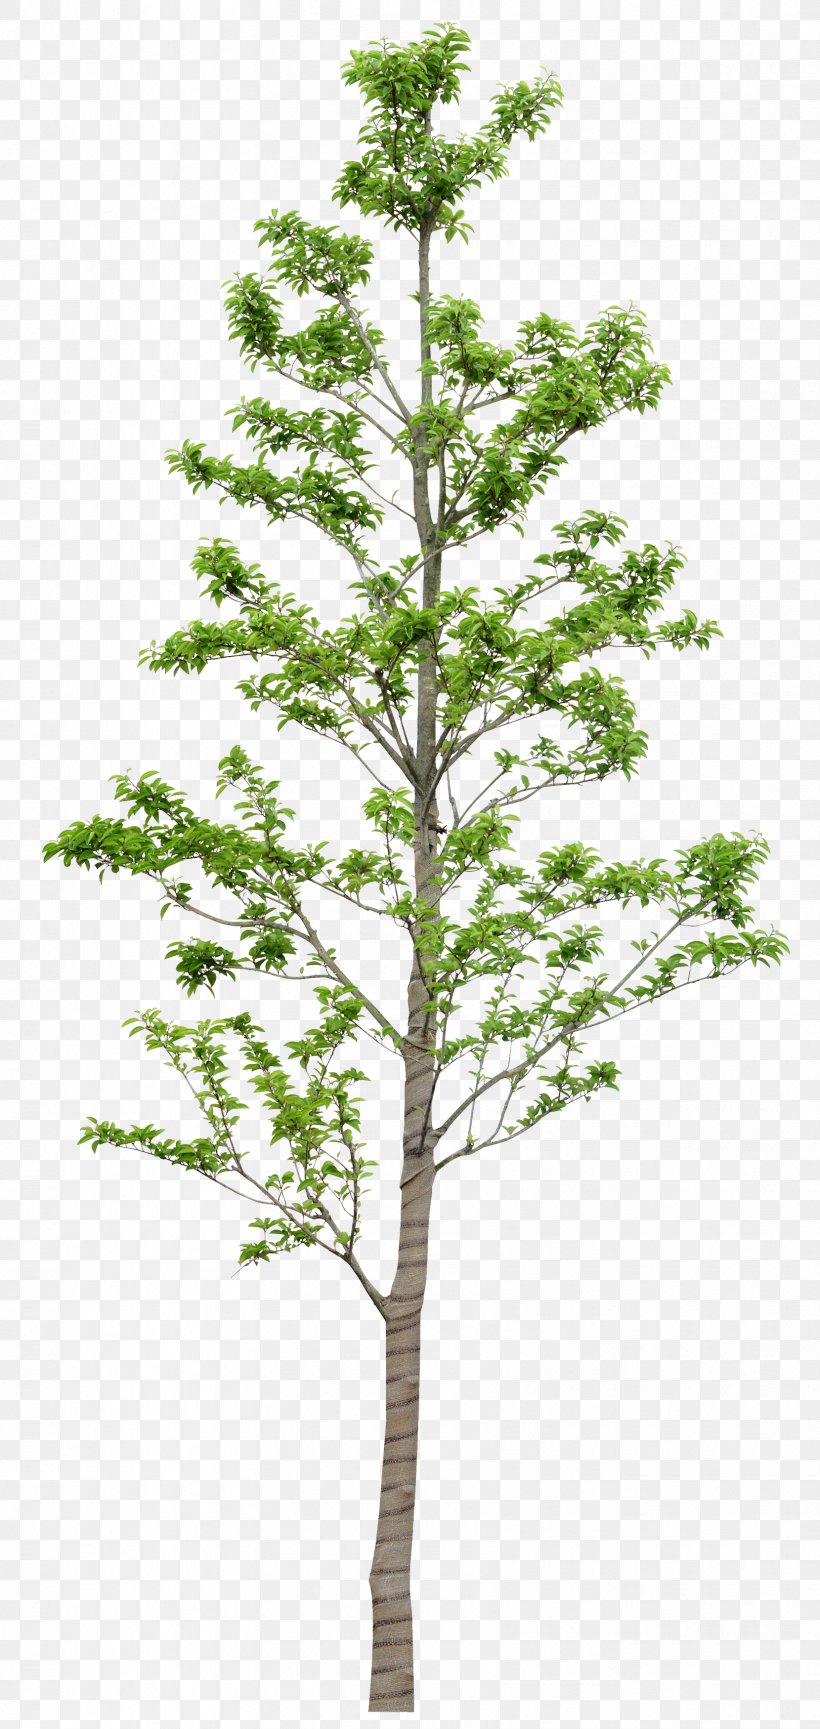 Tree Leaf Plant Clip Art, PNG, 1659x3500px, Tree, Branch, Conifer, Conifers, Evergreen Download Free